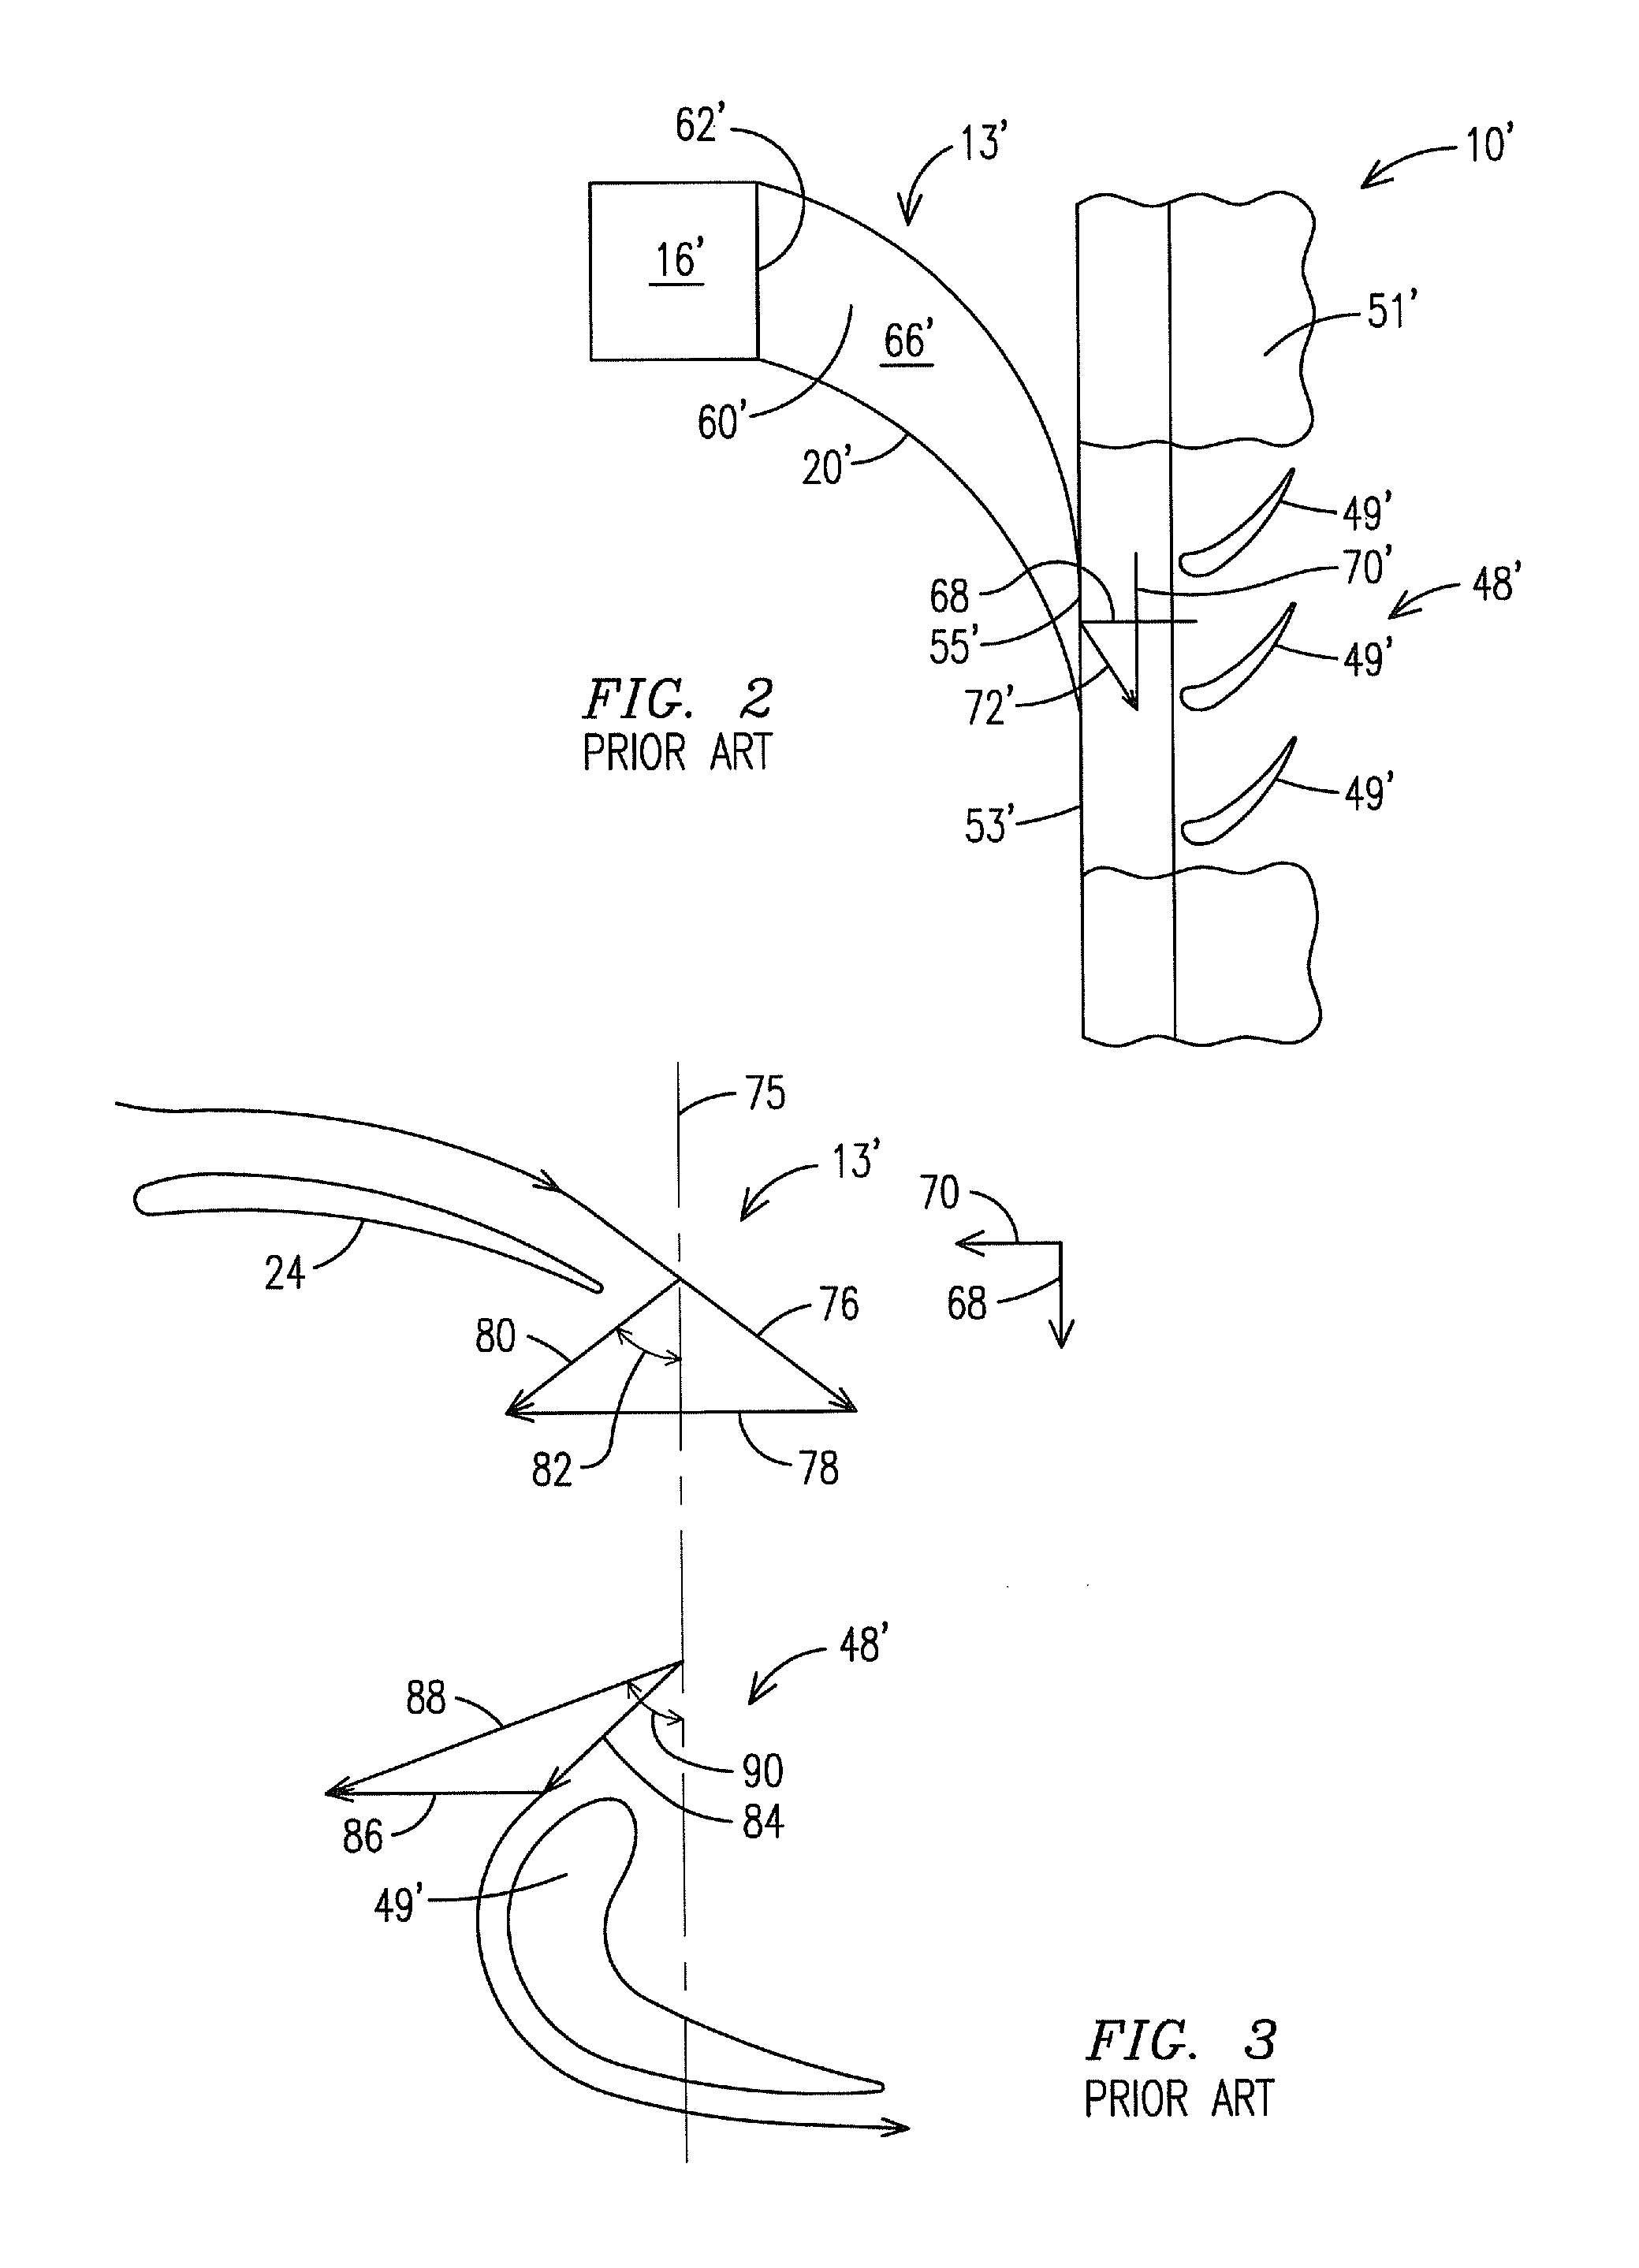 Mid-section of a can-annular gas turbine engine with a cooling system for the transition